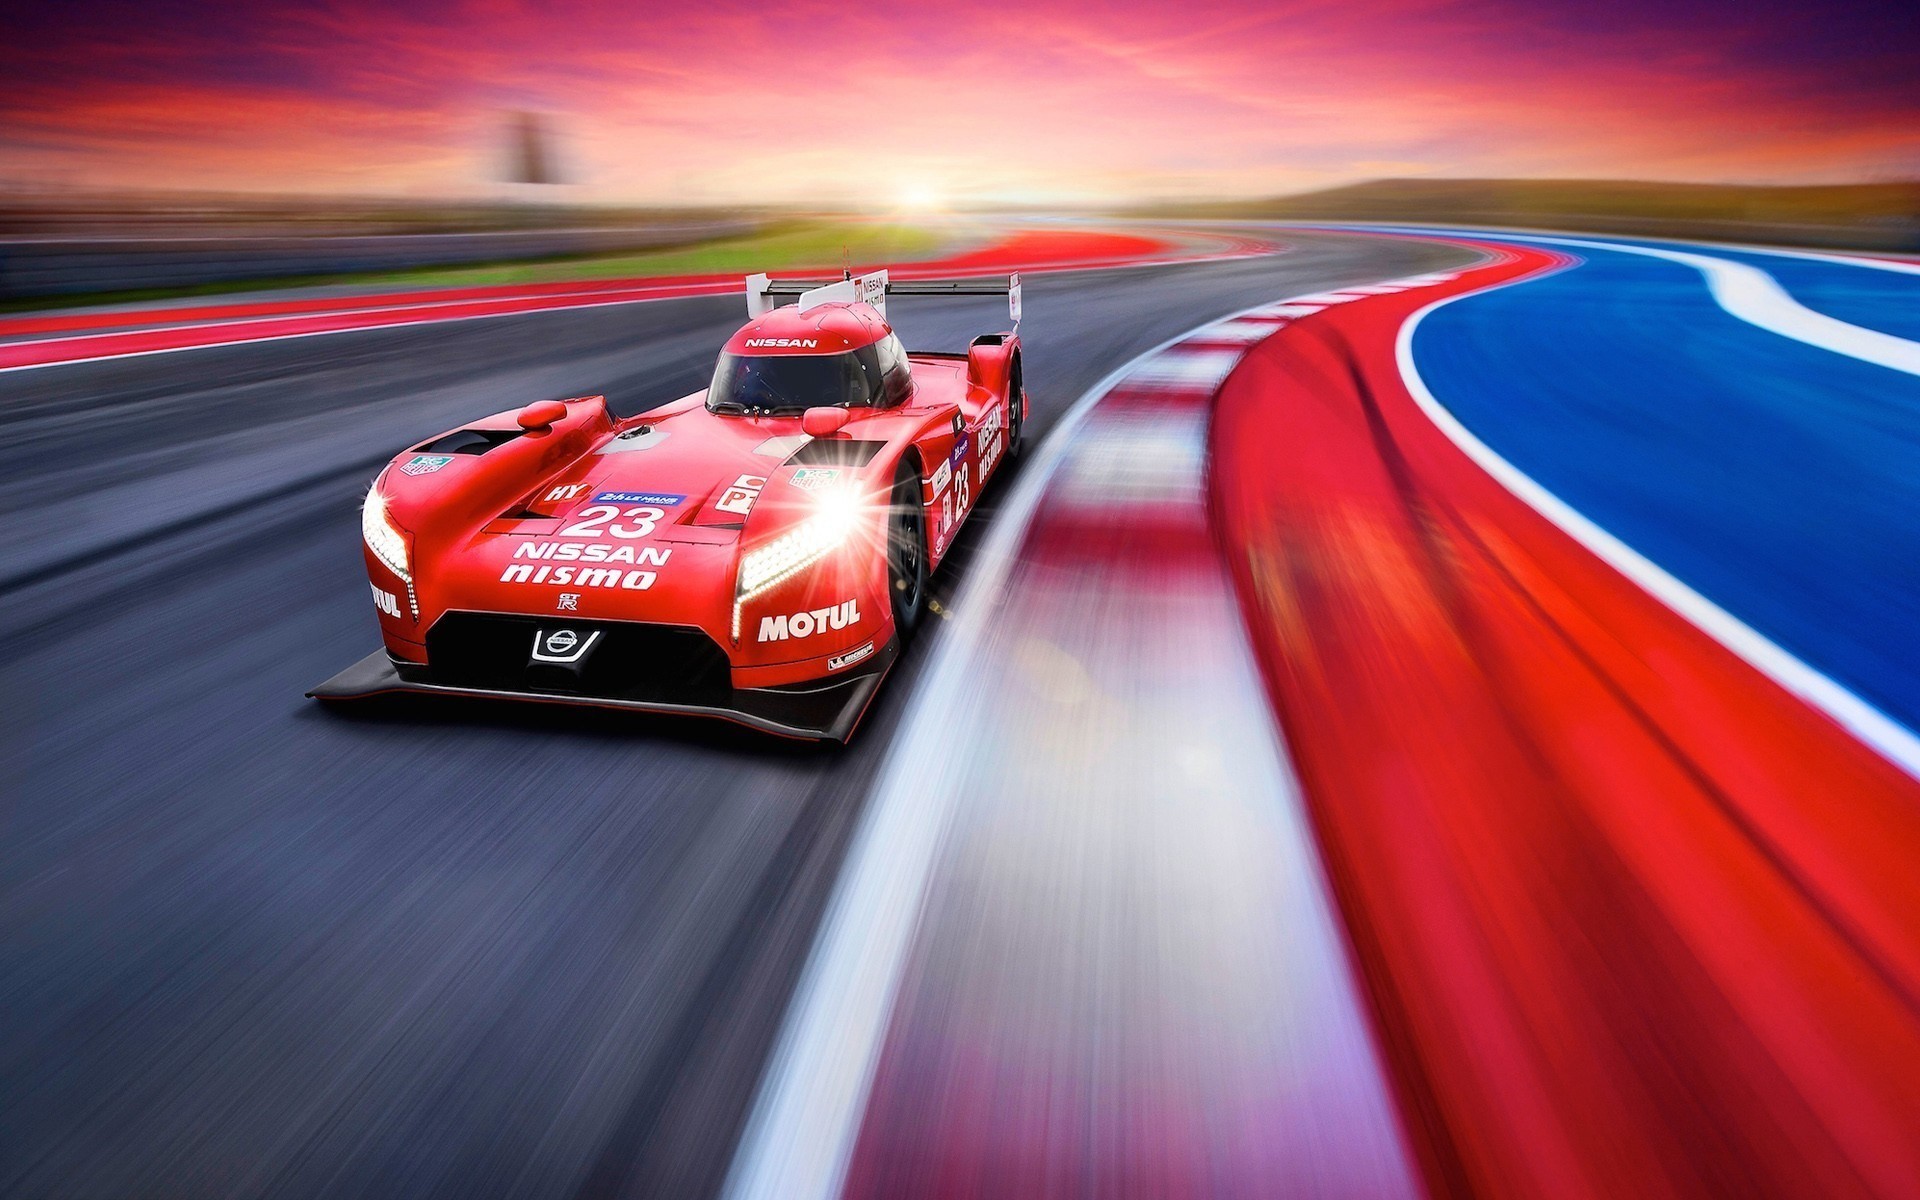 1920x1200   Awesome Racing Track Wallpaper 46562.  Awesome Racing  Track Wallpaper 46562